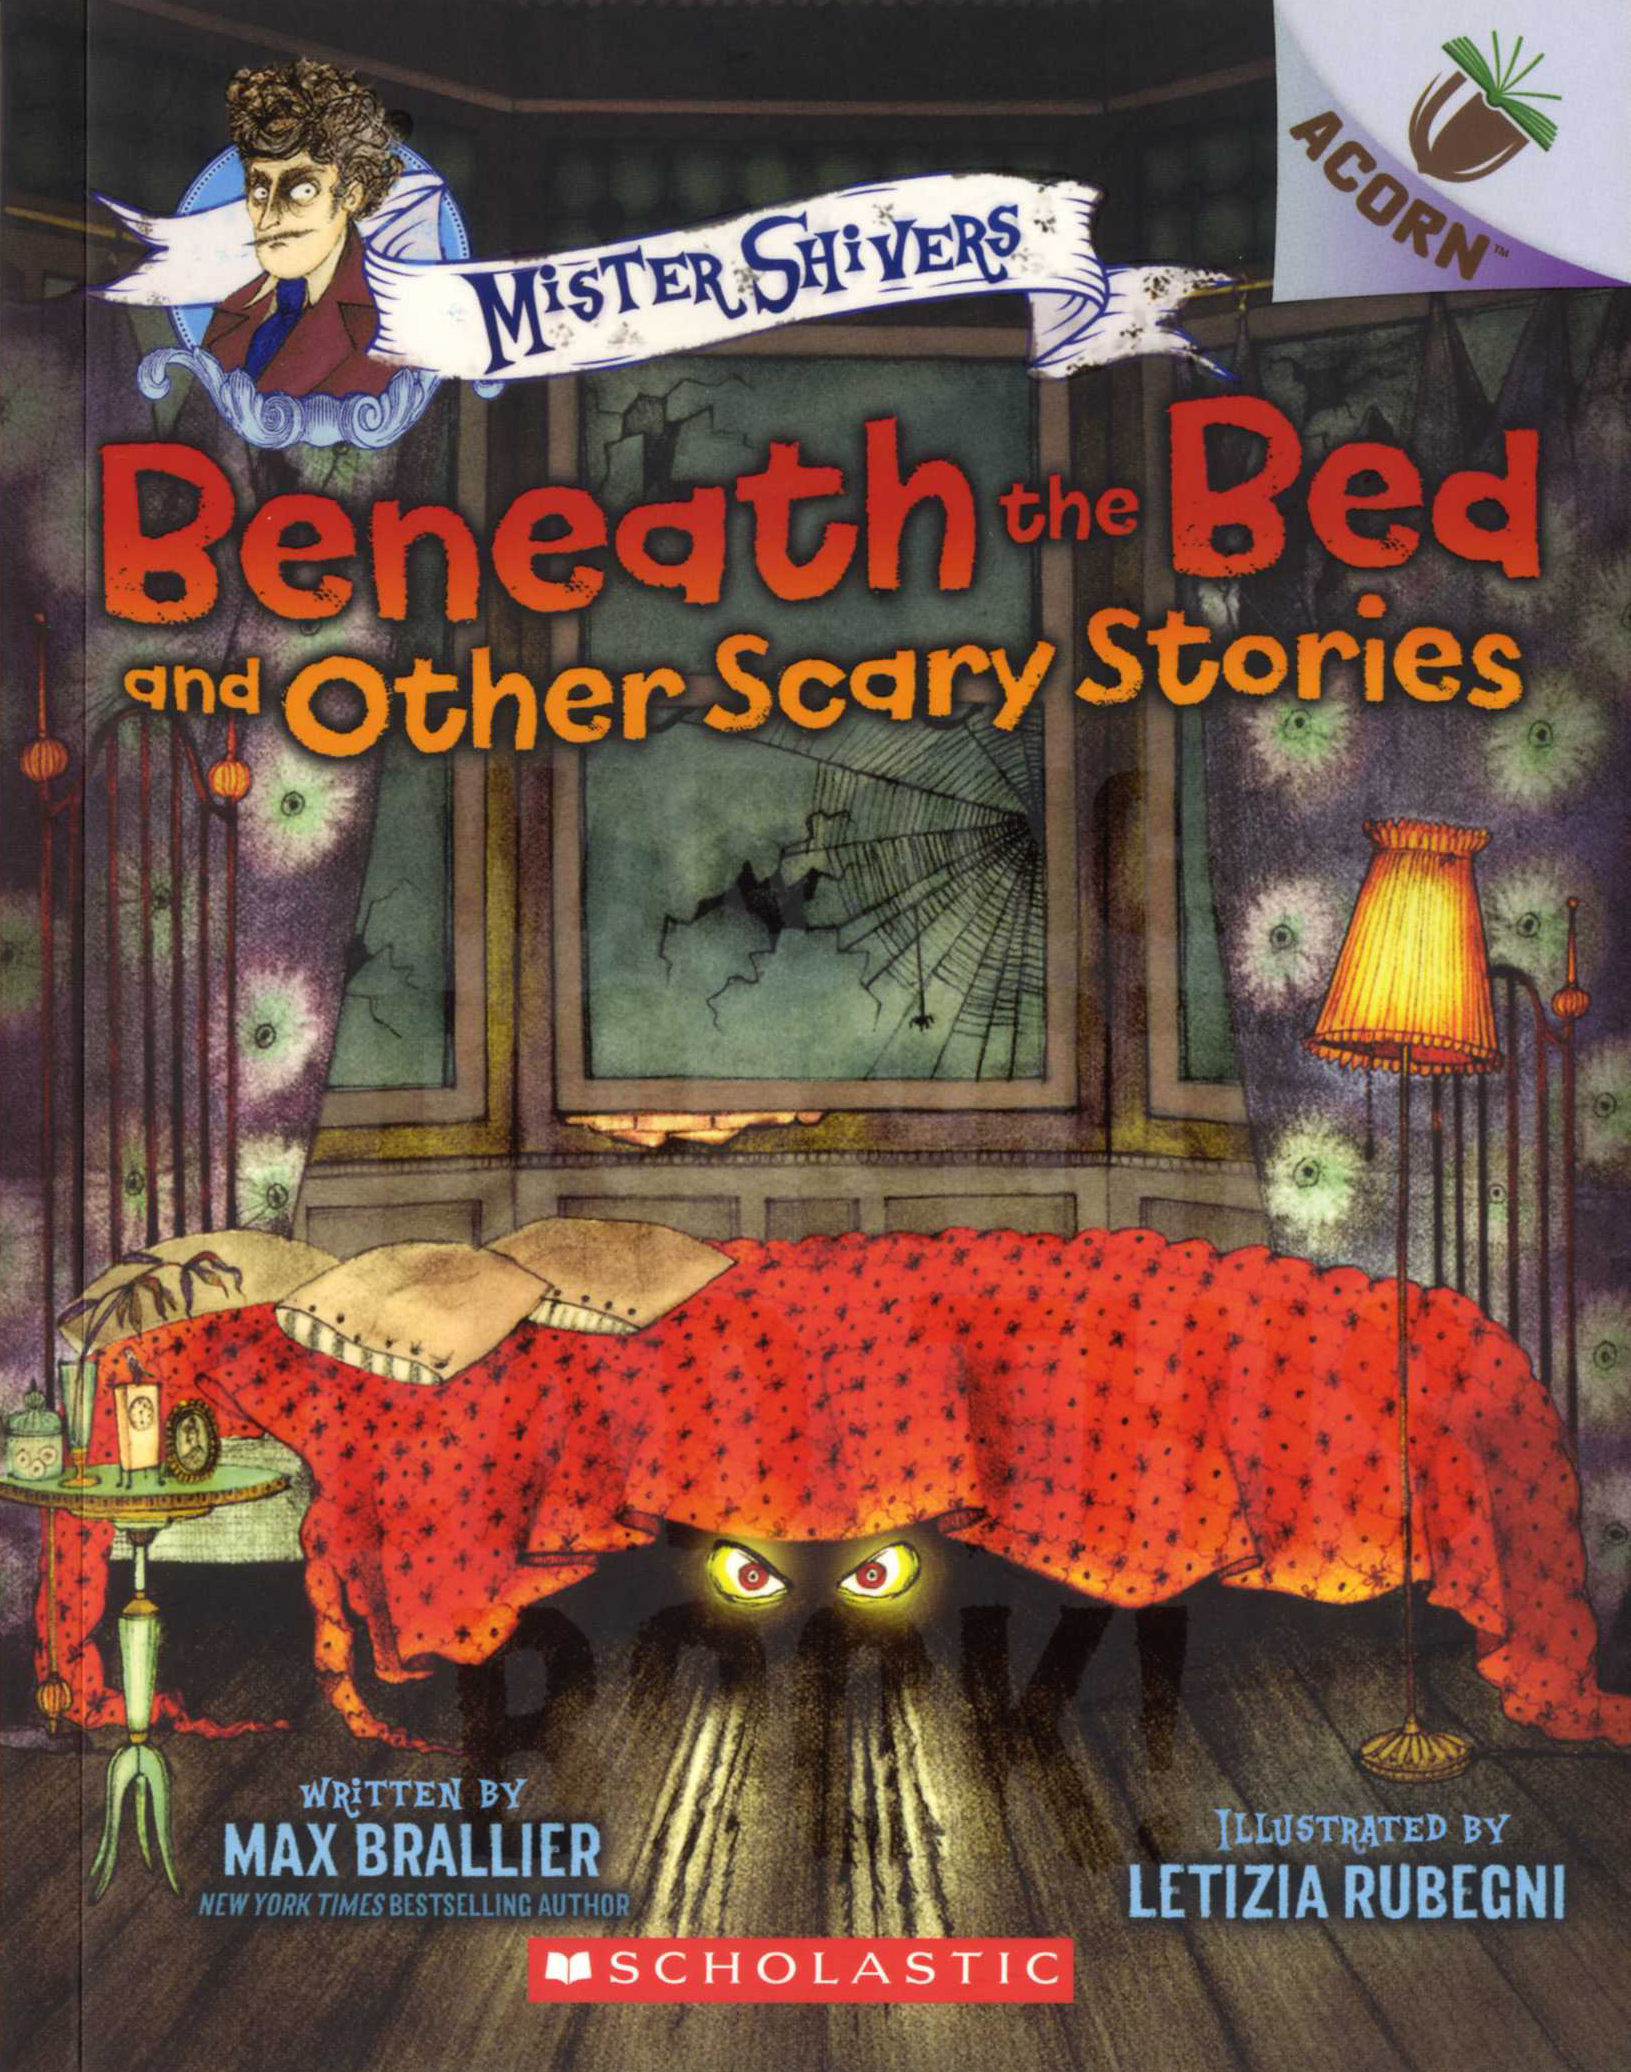 Thumnail : Mister Shivers #1: Beneath the Bed and Other Scary Stories